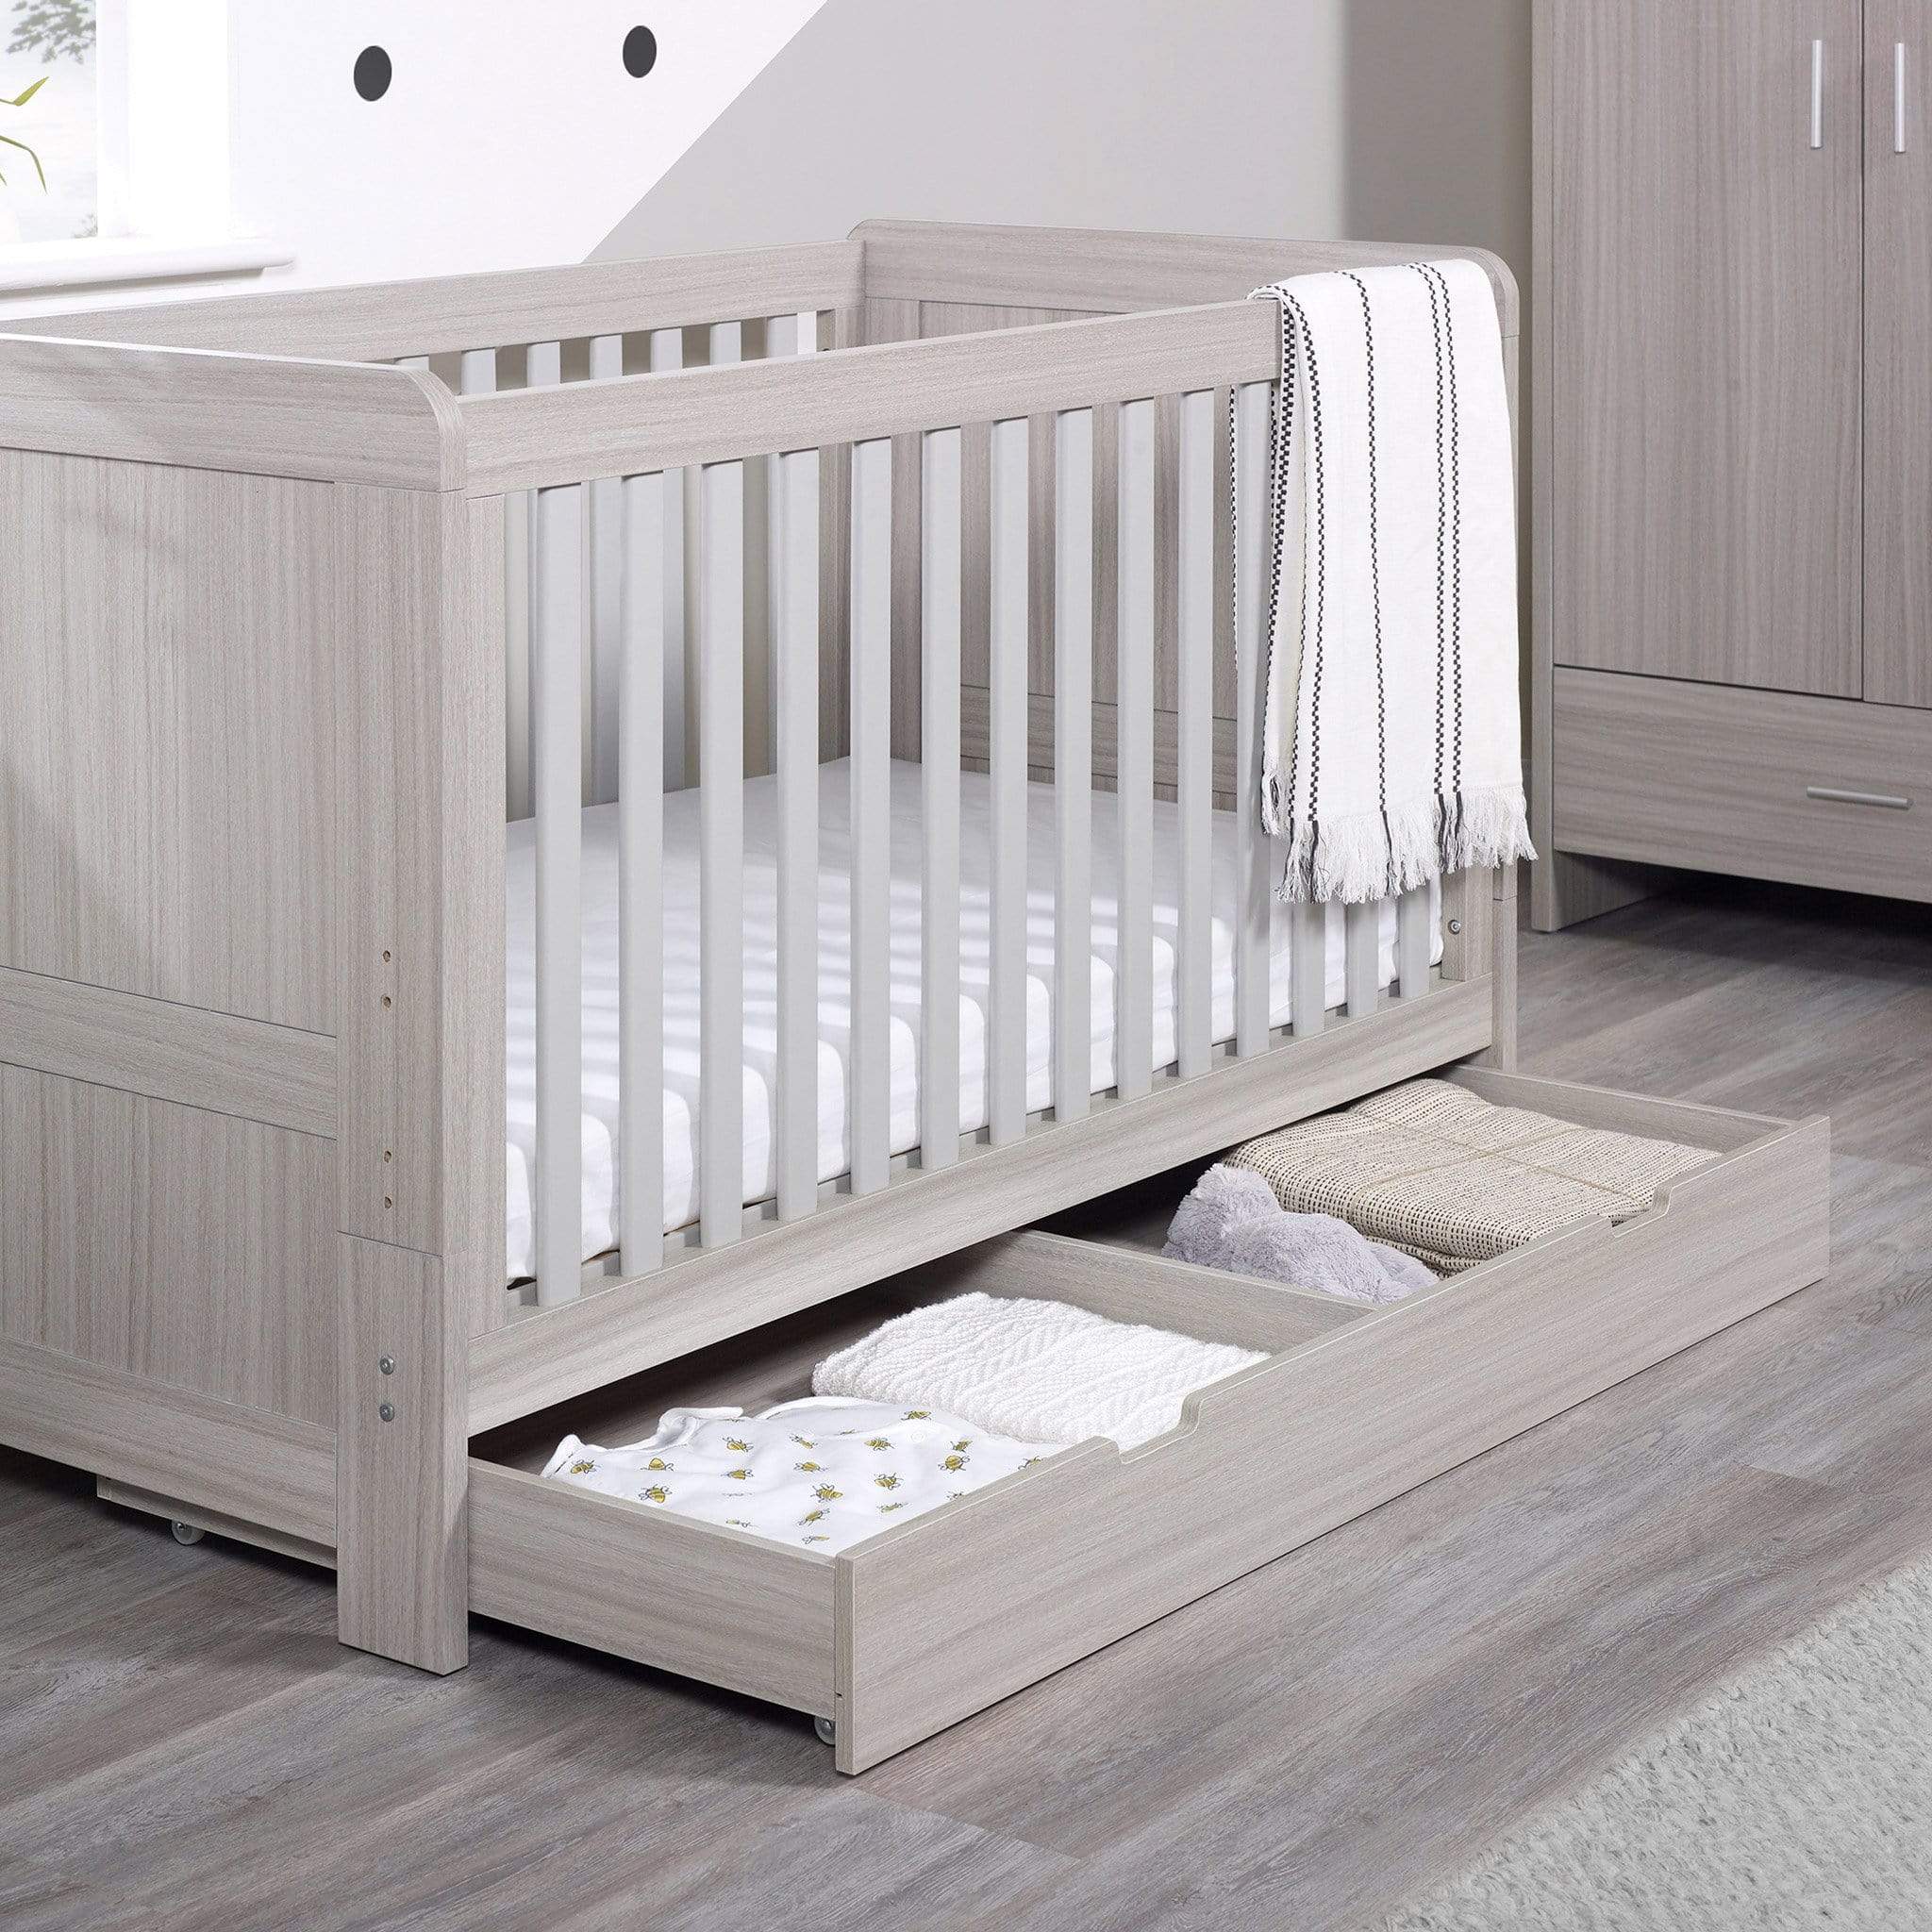 Ickle Bubba Pembrey Cot Bed, Under Drawer and Changing Unit Ash Grey Cot Beds